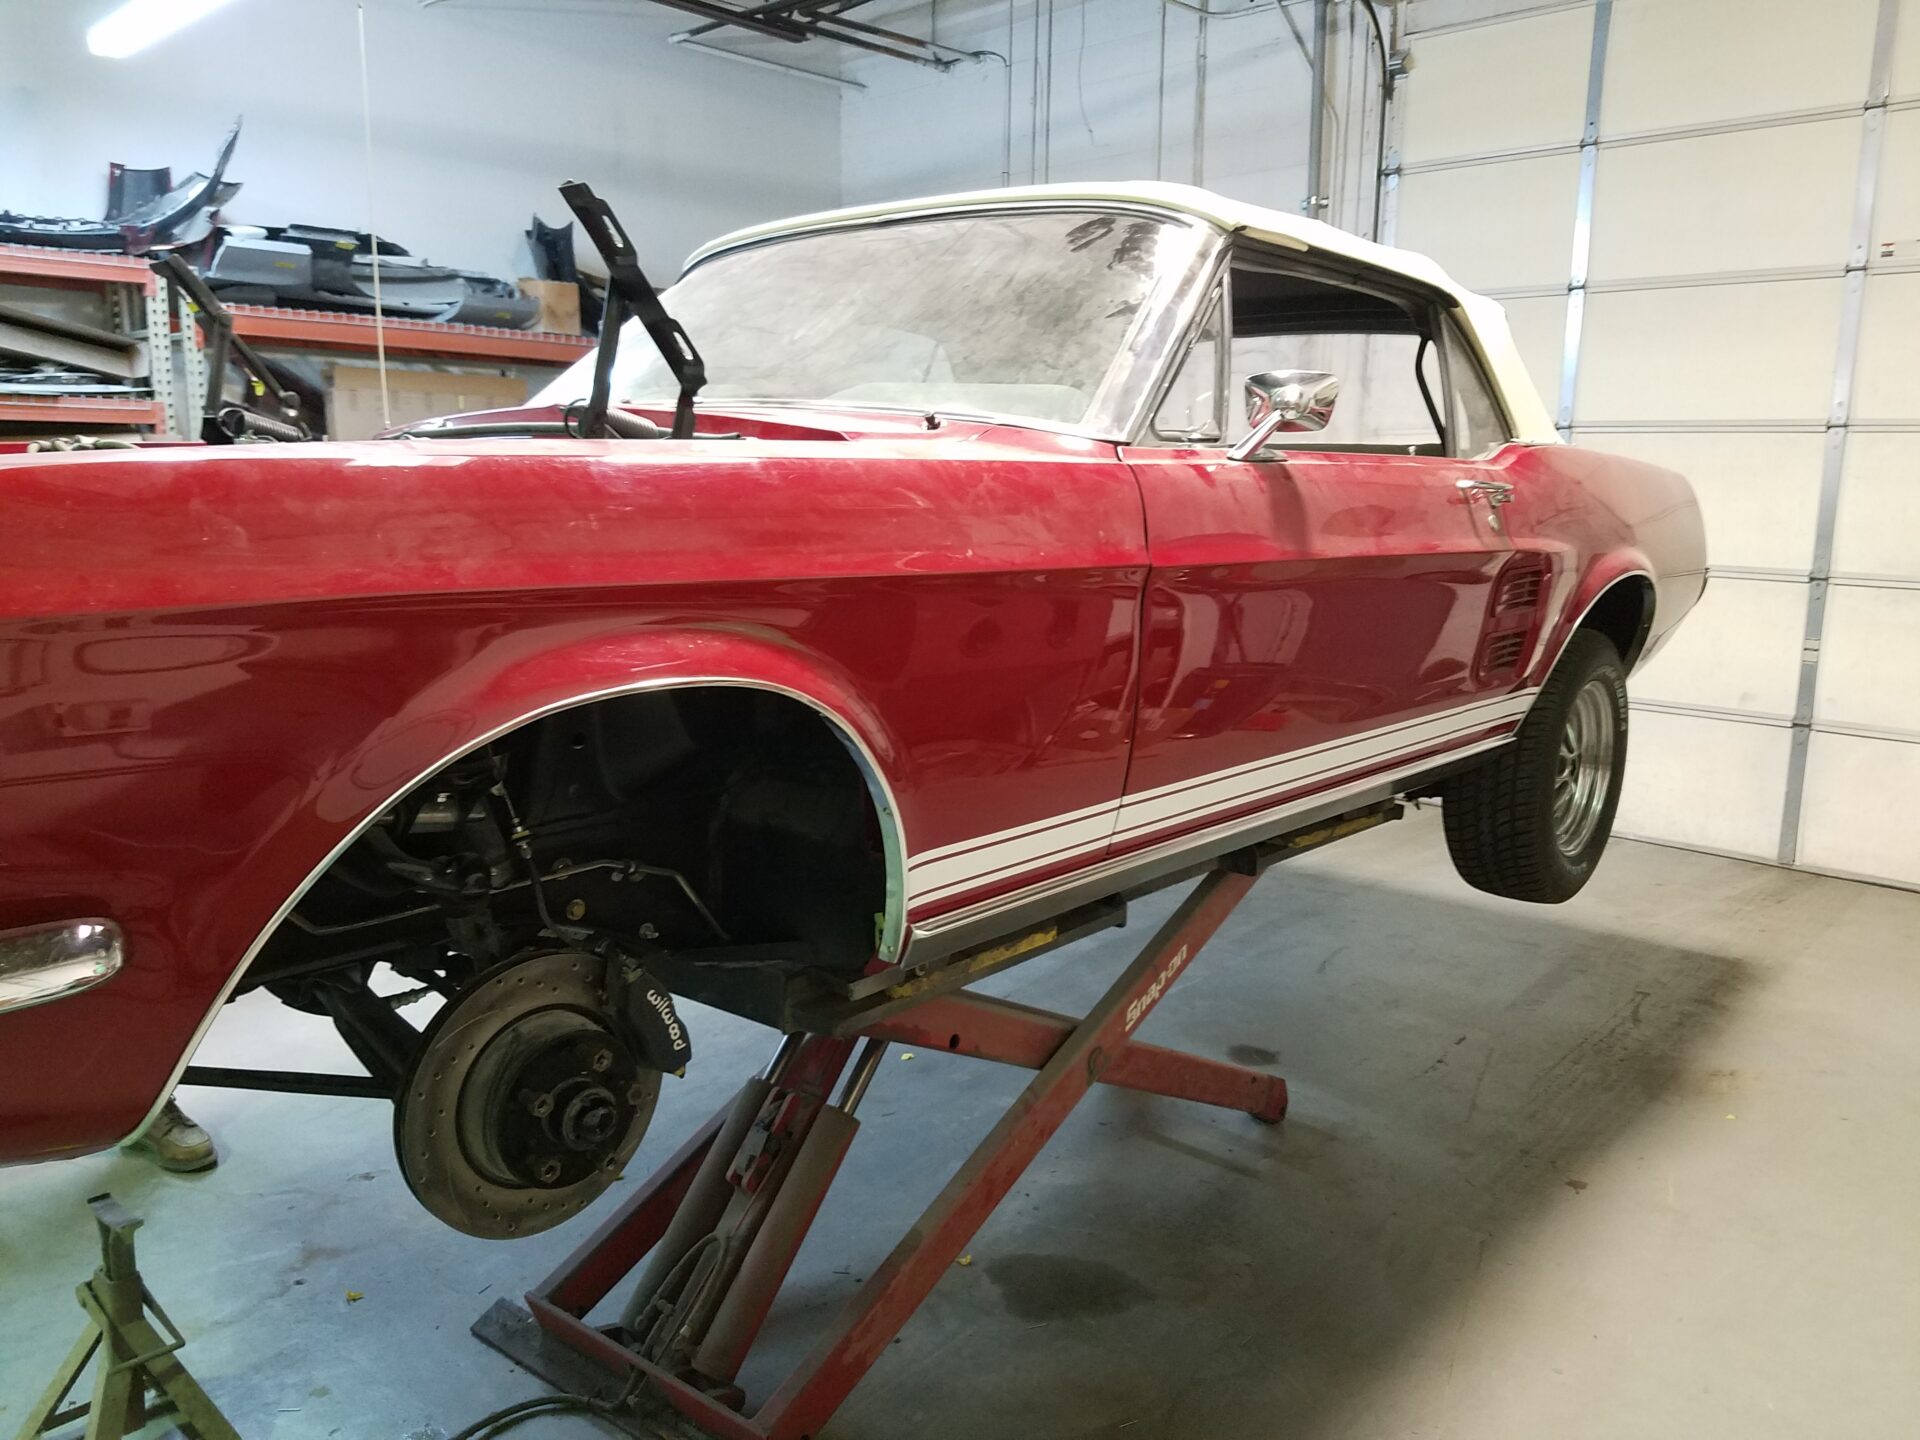 A dusty 1967 Ford Mustang Convertible before the restoration